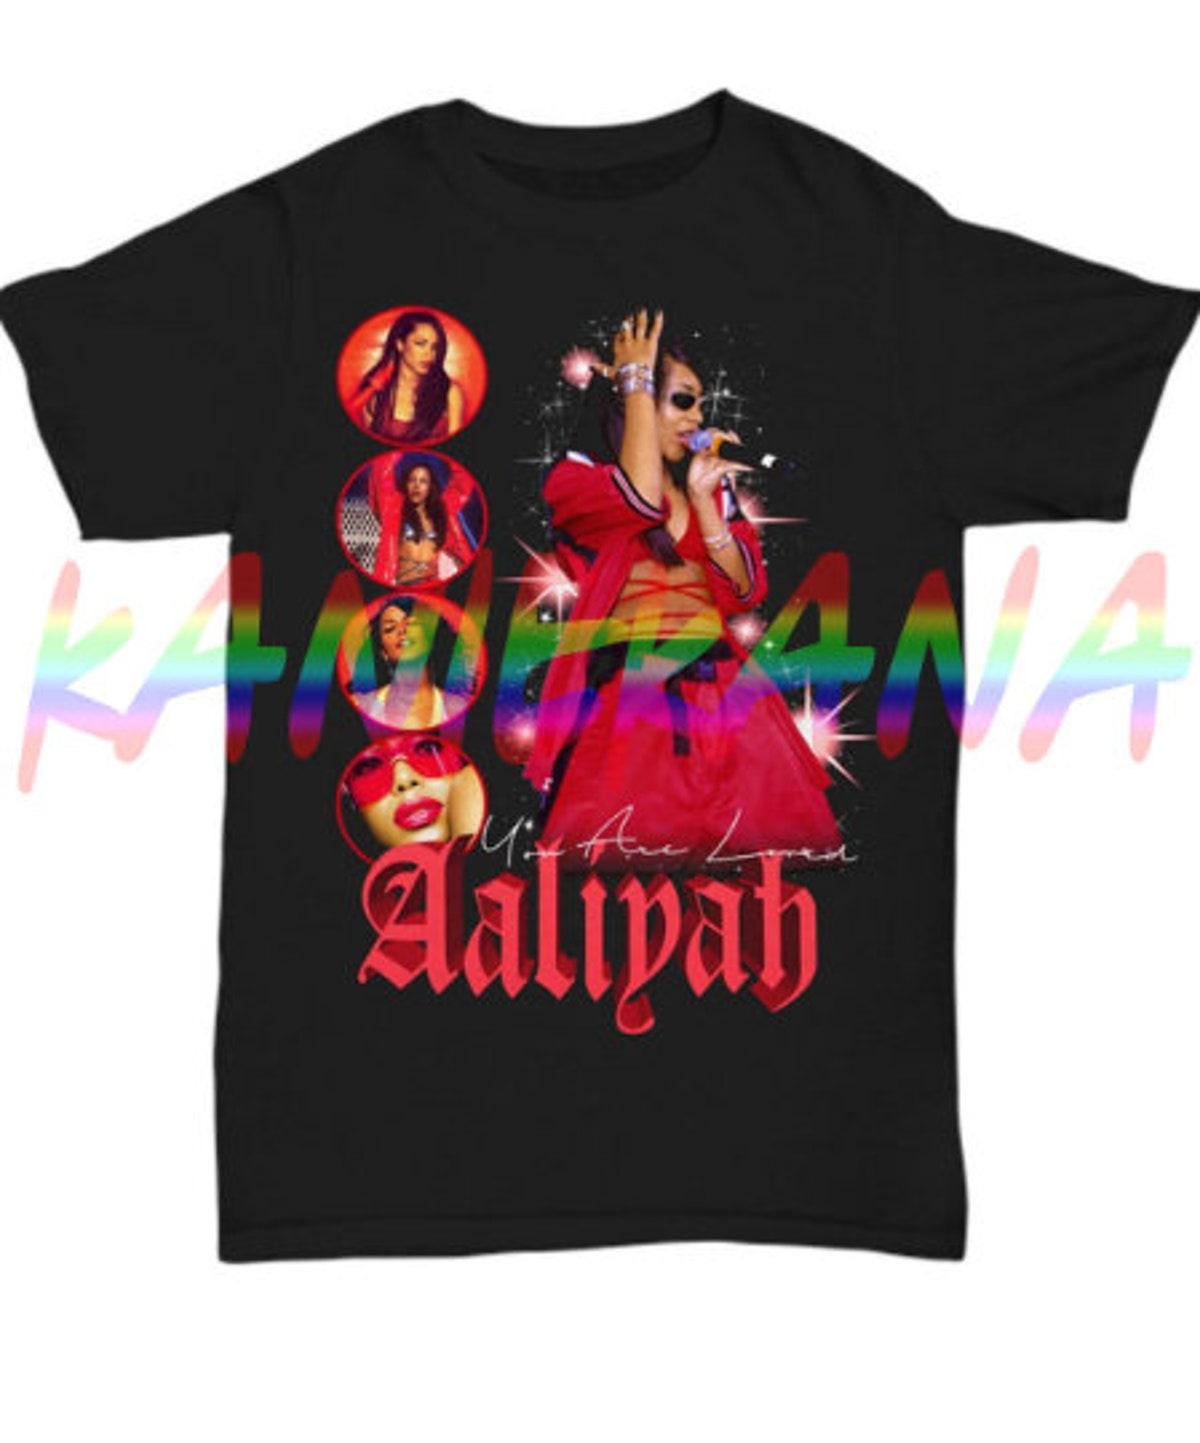 Aaliyah Vintage Unisex T-shirt Gift For Fans